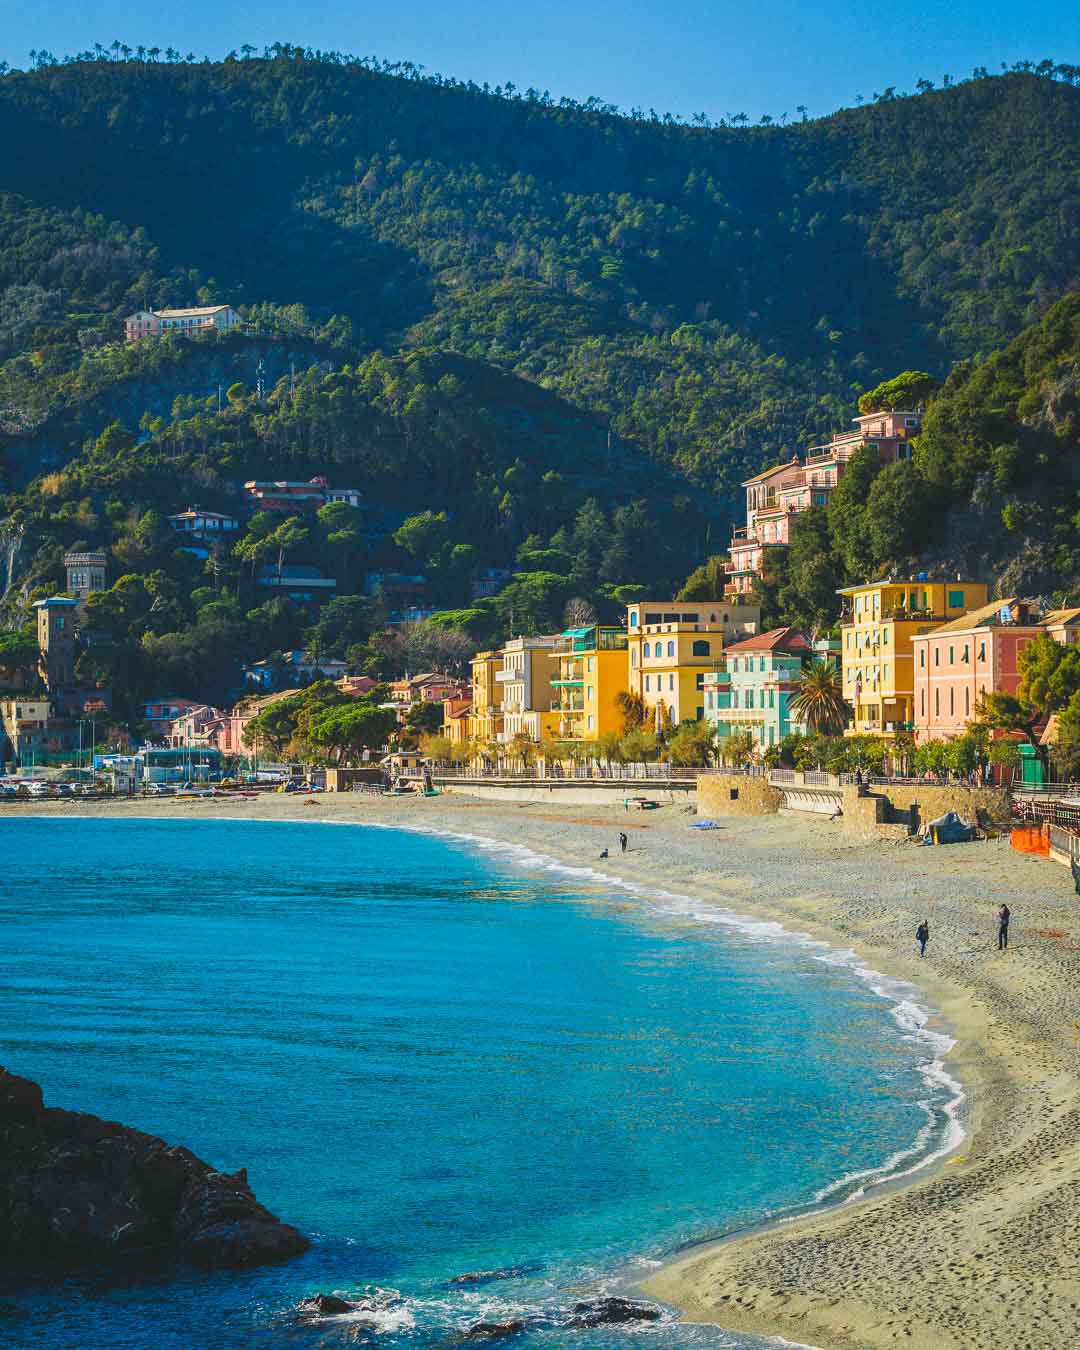 reaching monterosso and its beach